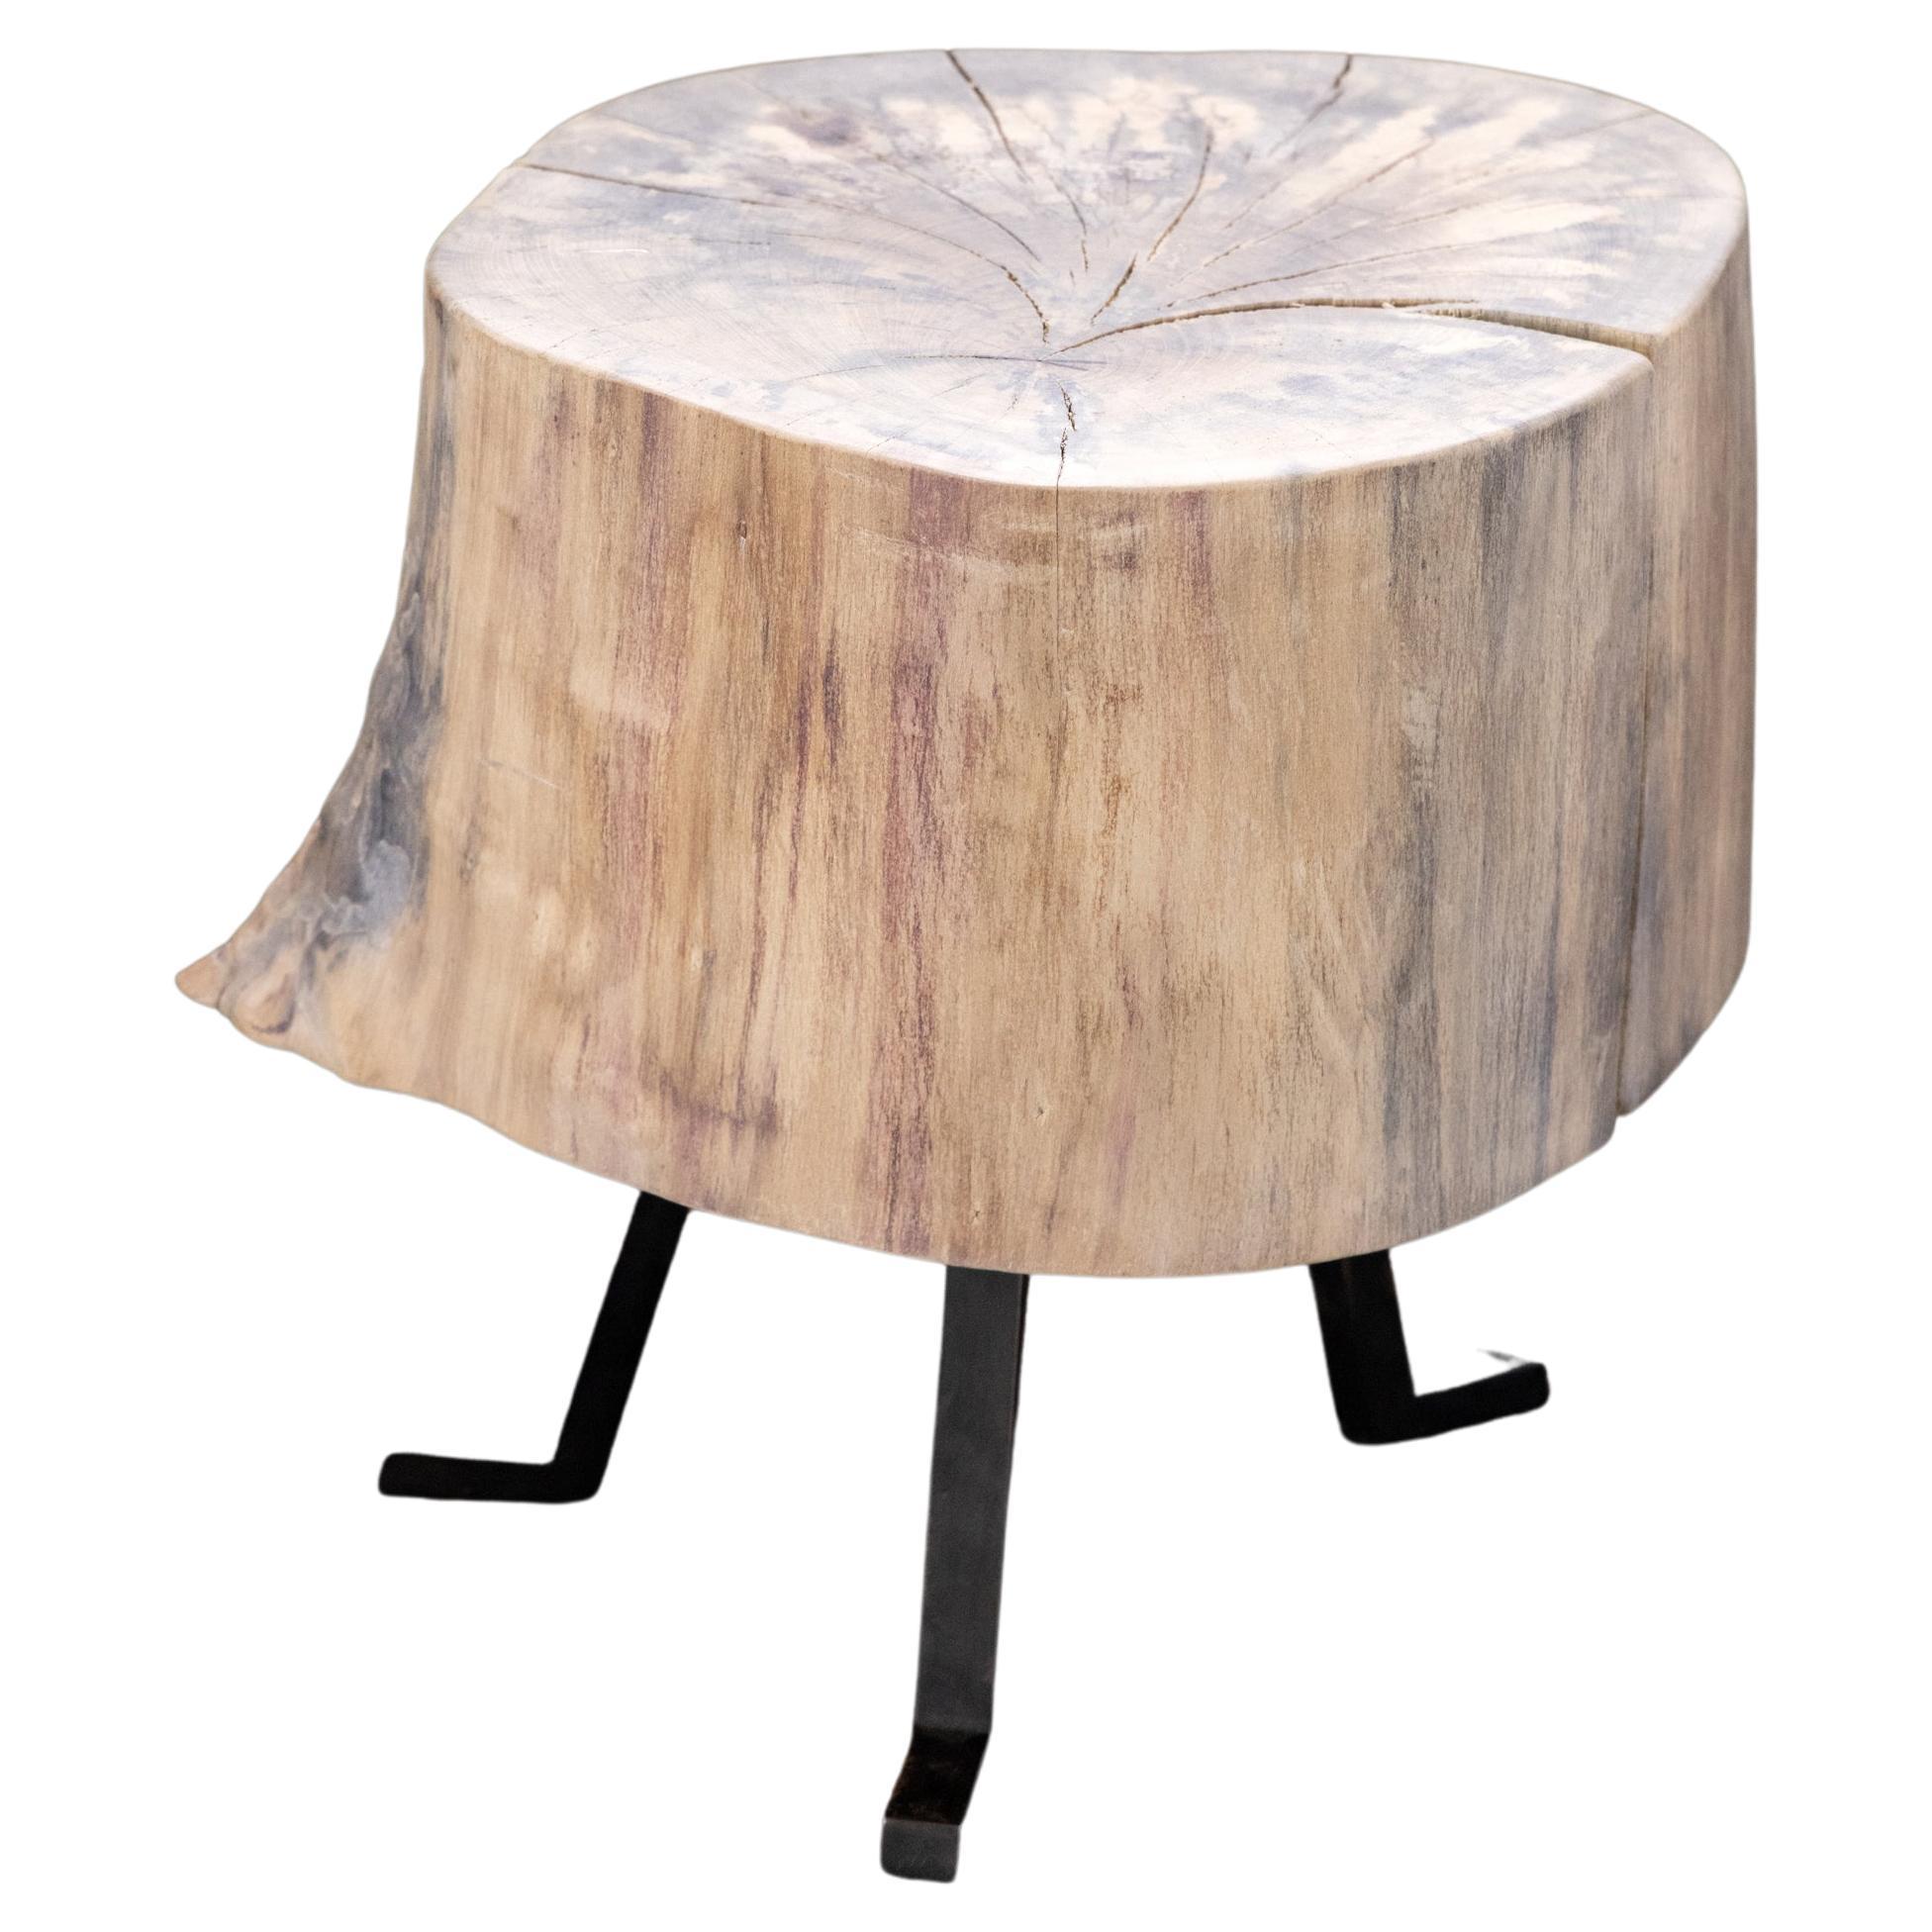 End Grain Round Side Table Light Wood Black Patina Steel Legs by Alabama Sawyer